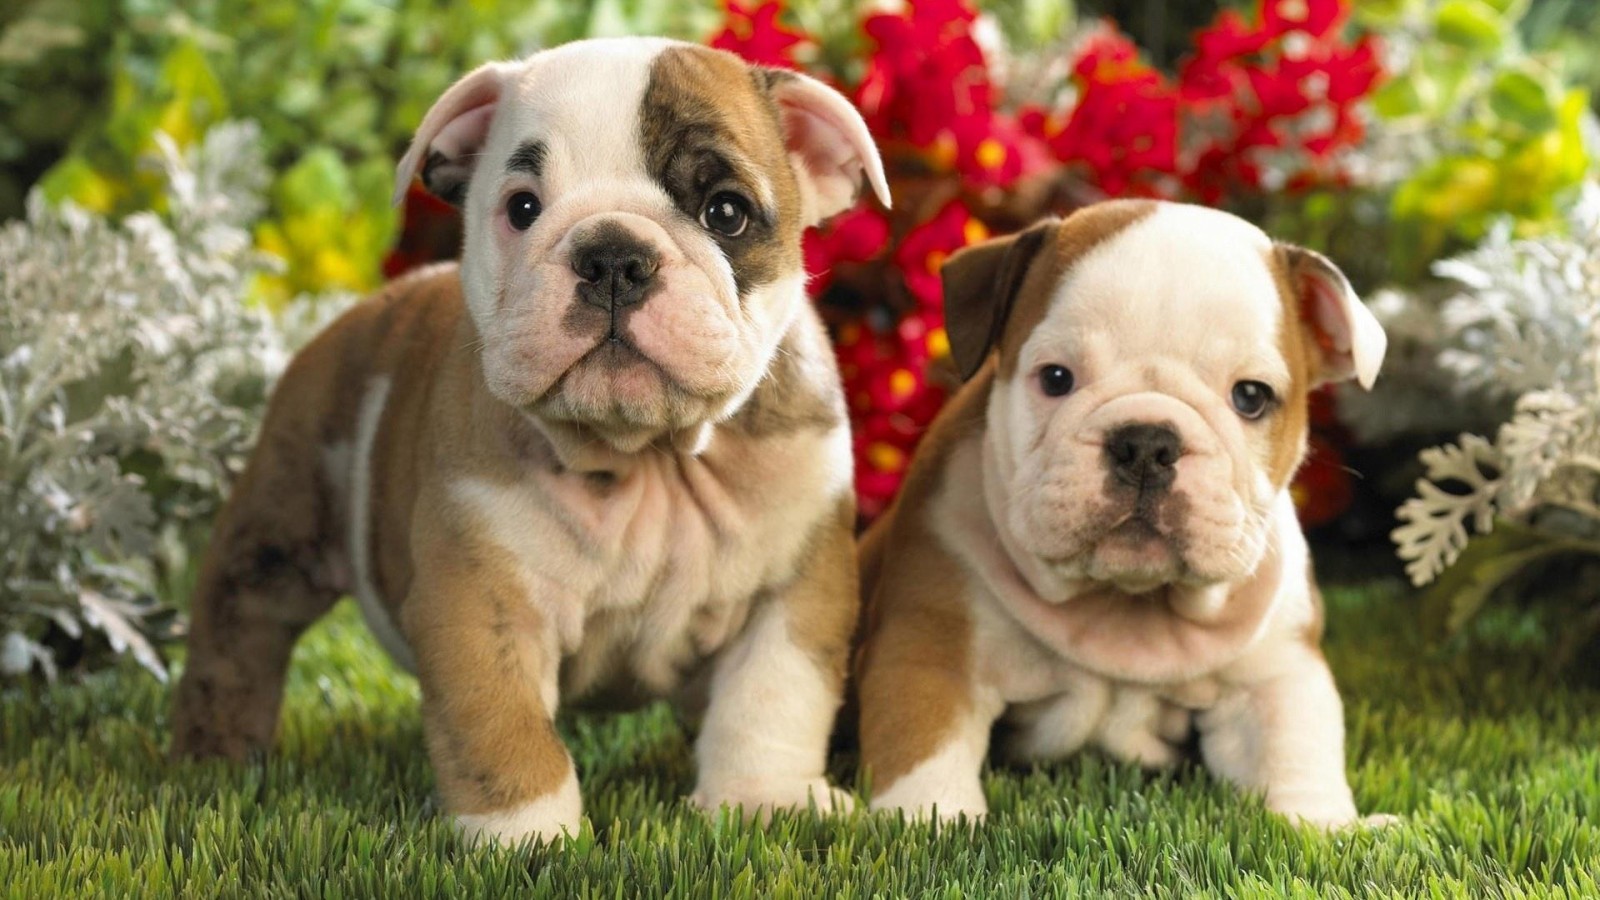 Dog, Cute, And Puppy Image - Pitbull Dog Cute Puppies - 1600x900 Wallpaper  